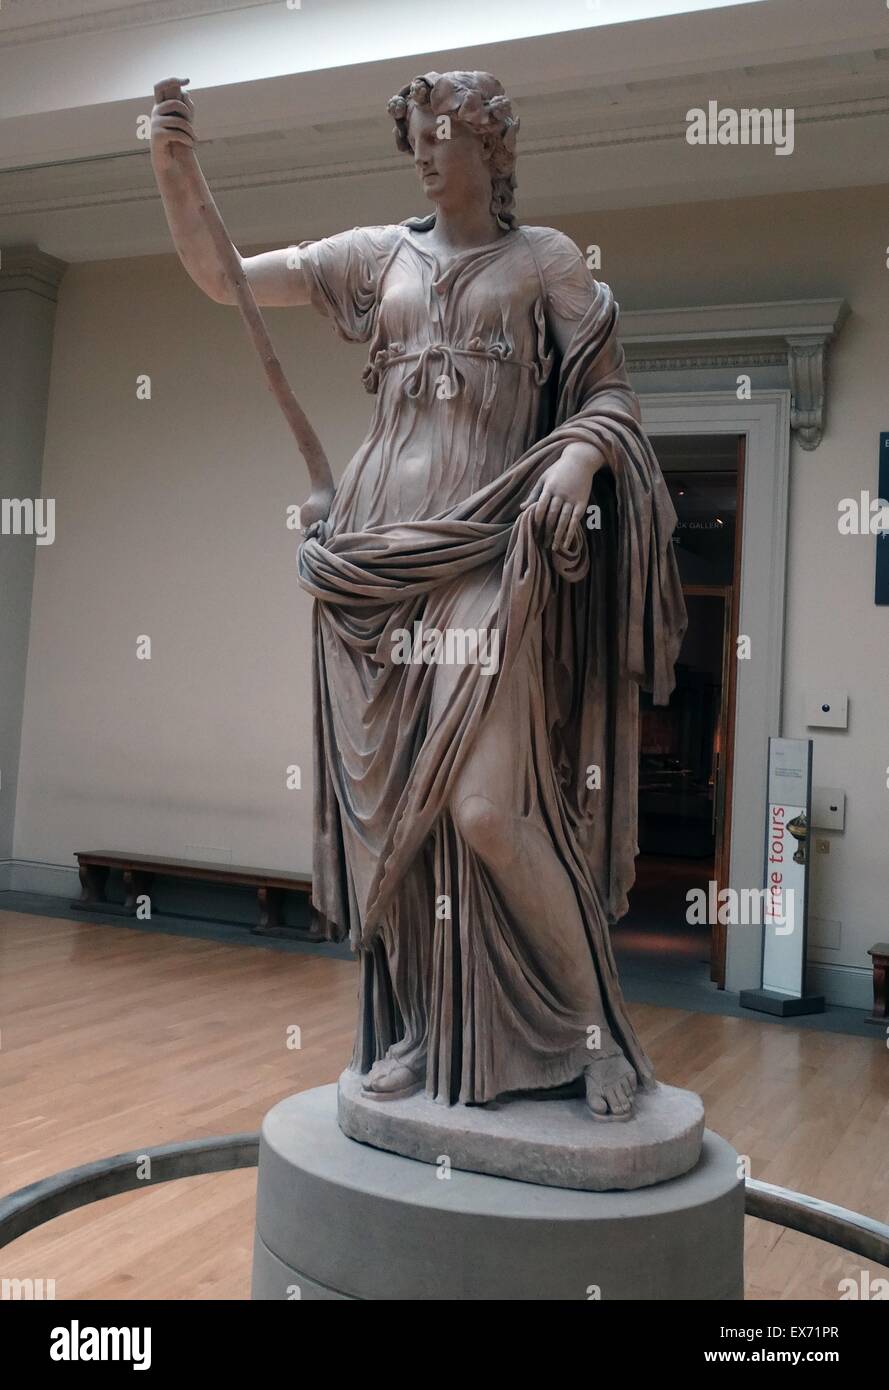 Thalia, Muse of Comedy Roman, 2nd century AD statue. ln ancient mythology, Thalia was one of the nine Muses. The Muses were female companions of the god Apollo and devoted to the arts and sciences. Stock Photo